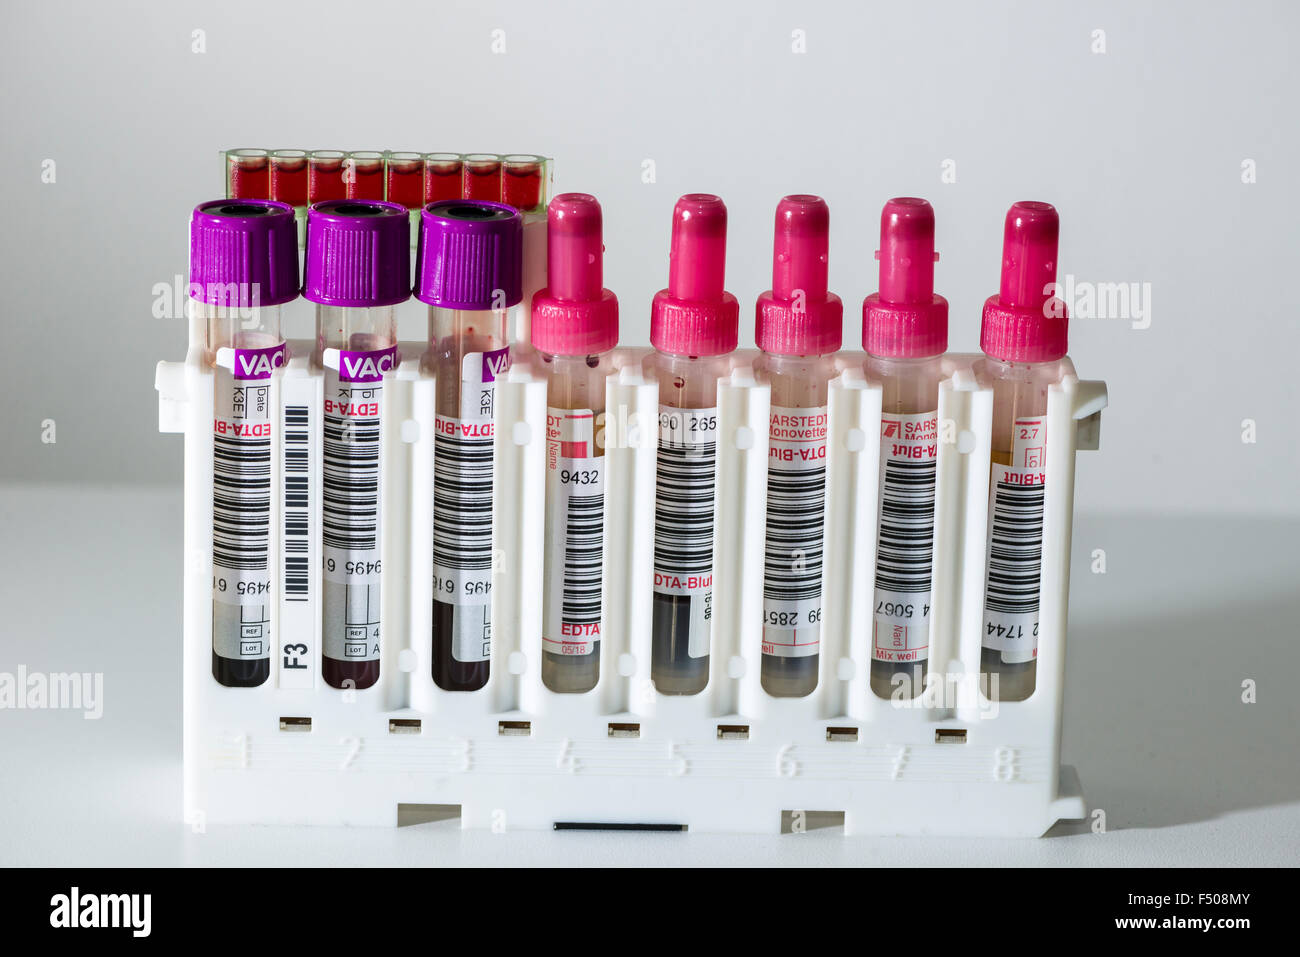 Many capillary tubes, filled with blood for diagnose the blood type, are sorted in a white rack Stock Photo